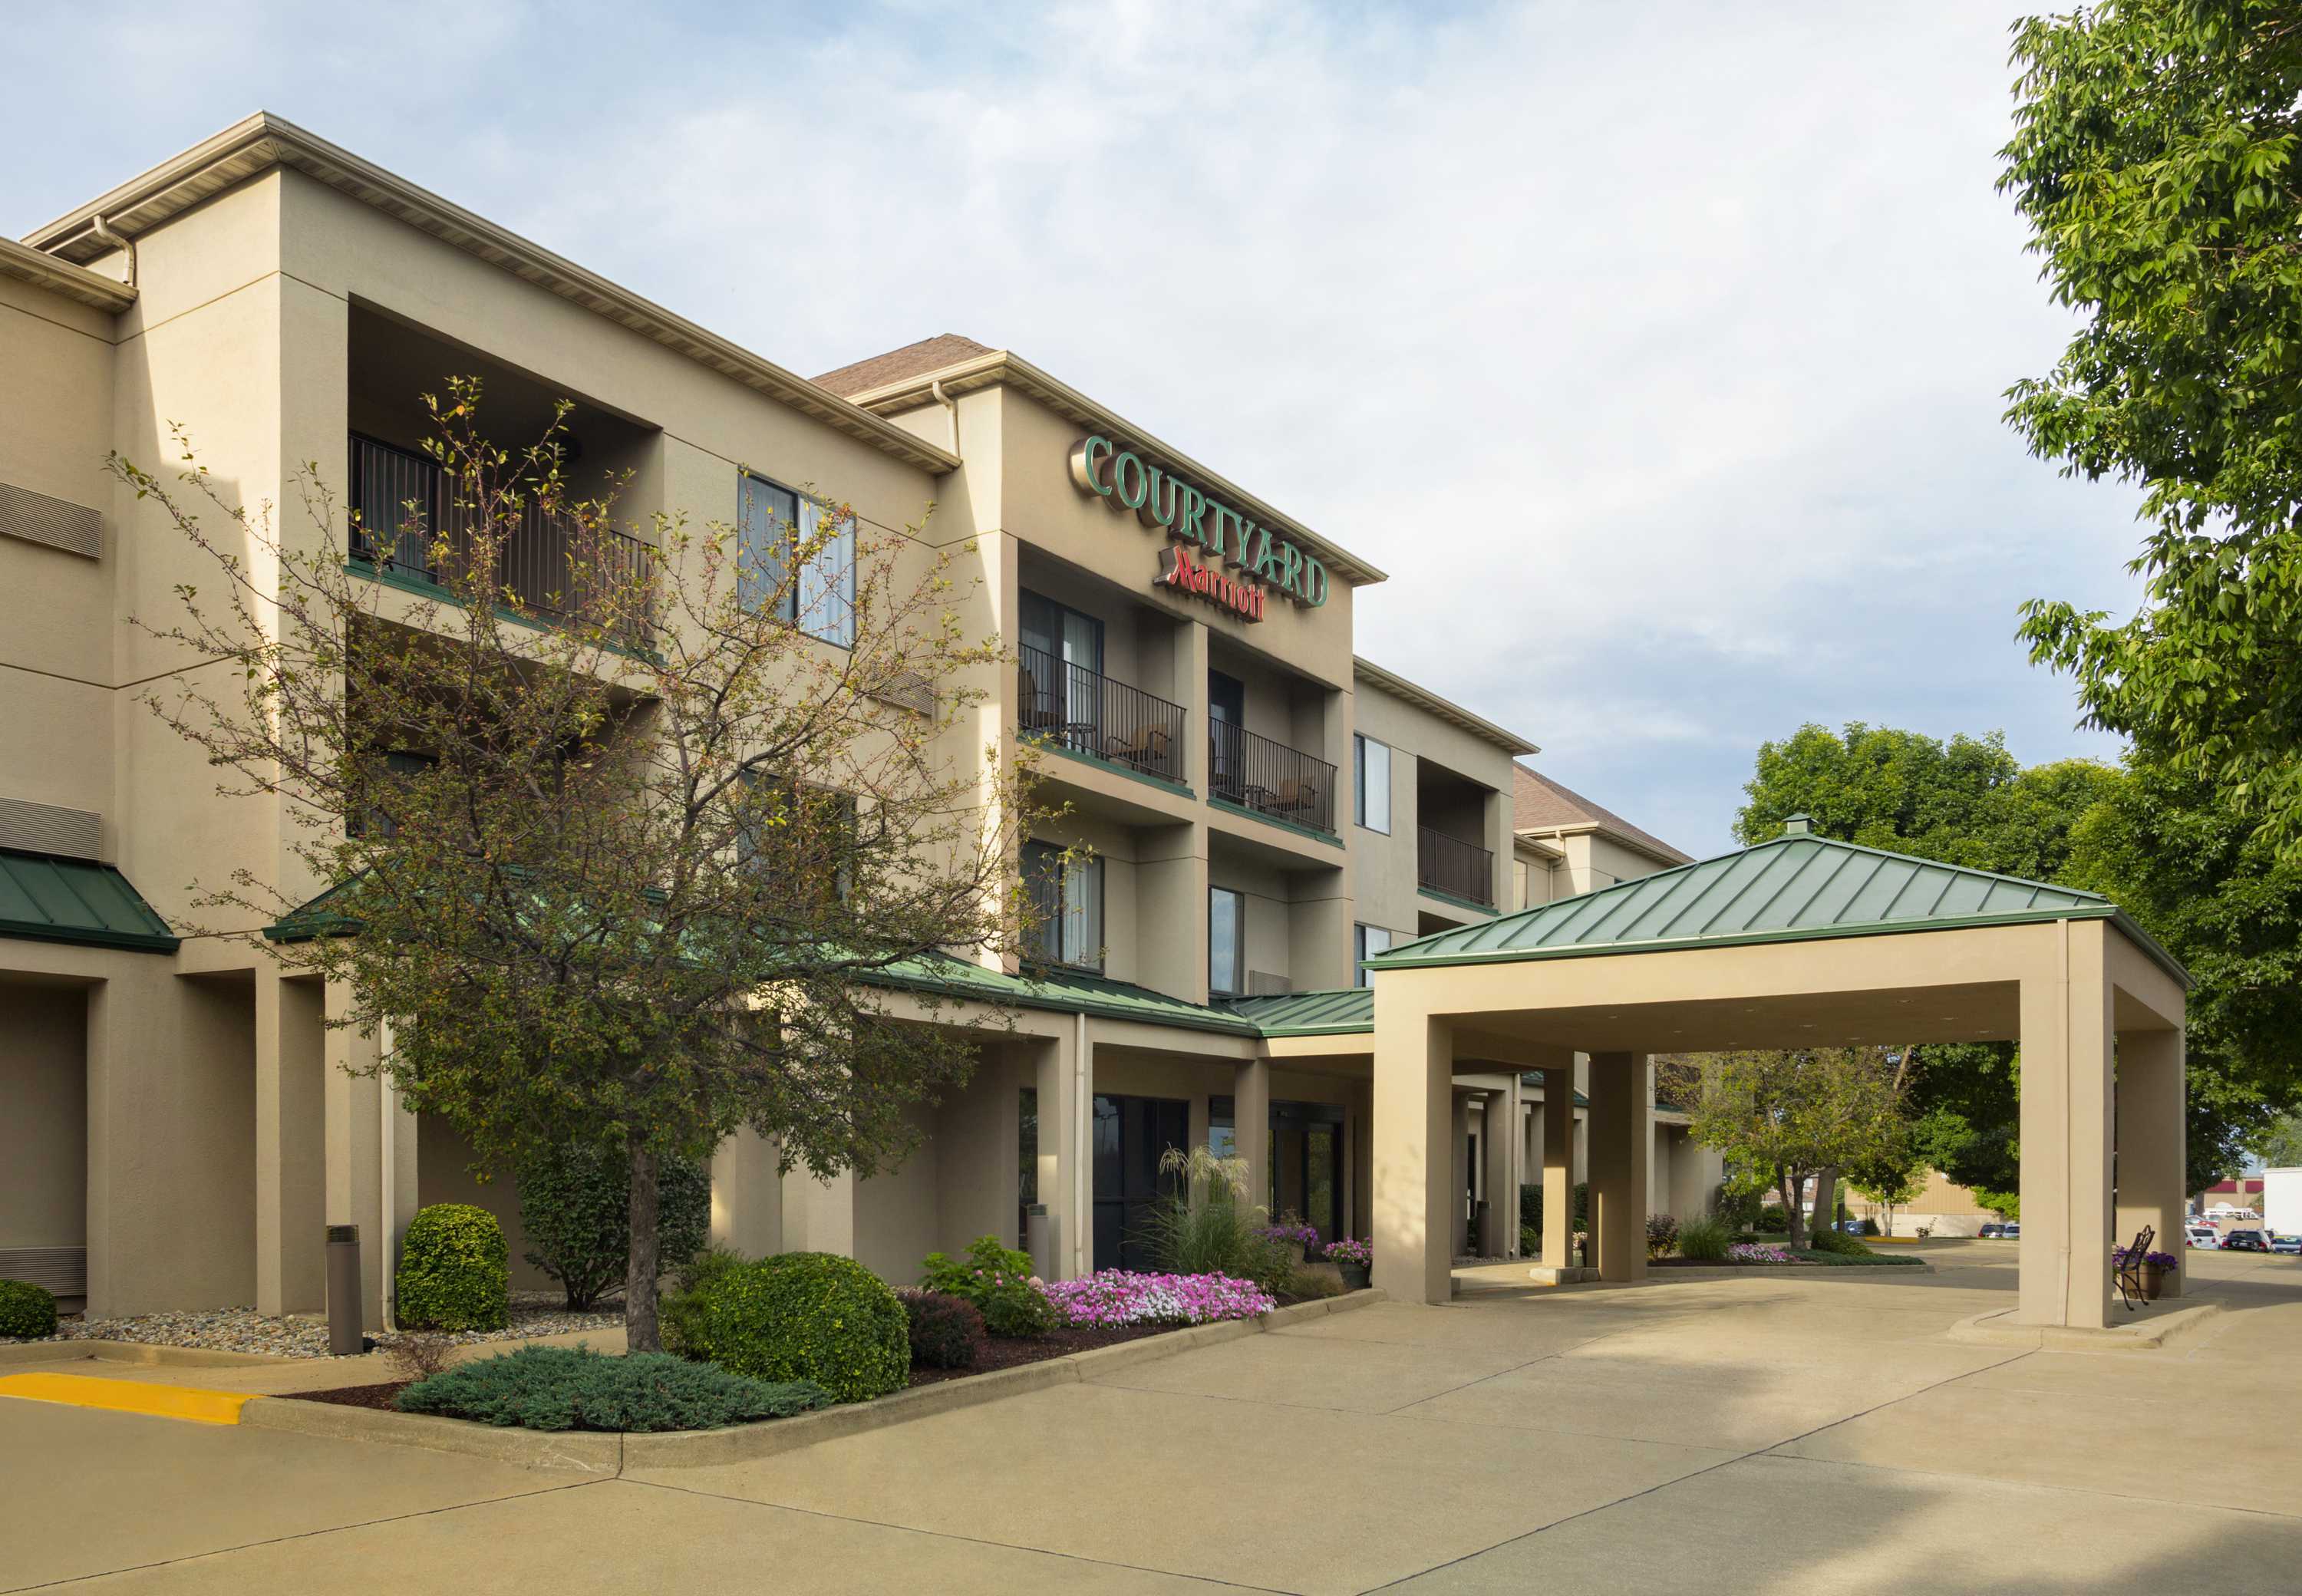 Photo of Courtyard by Marriott Champaign, Champaign, IL